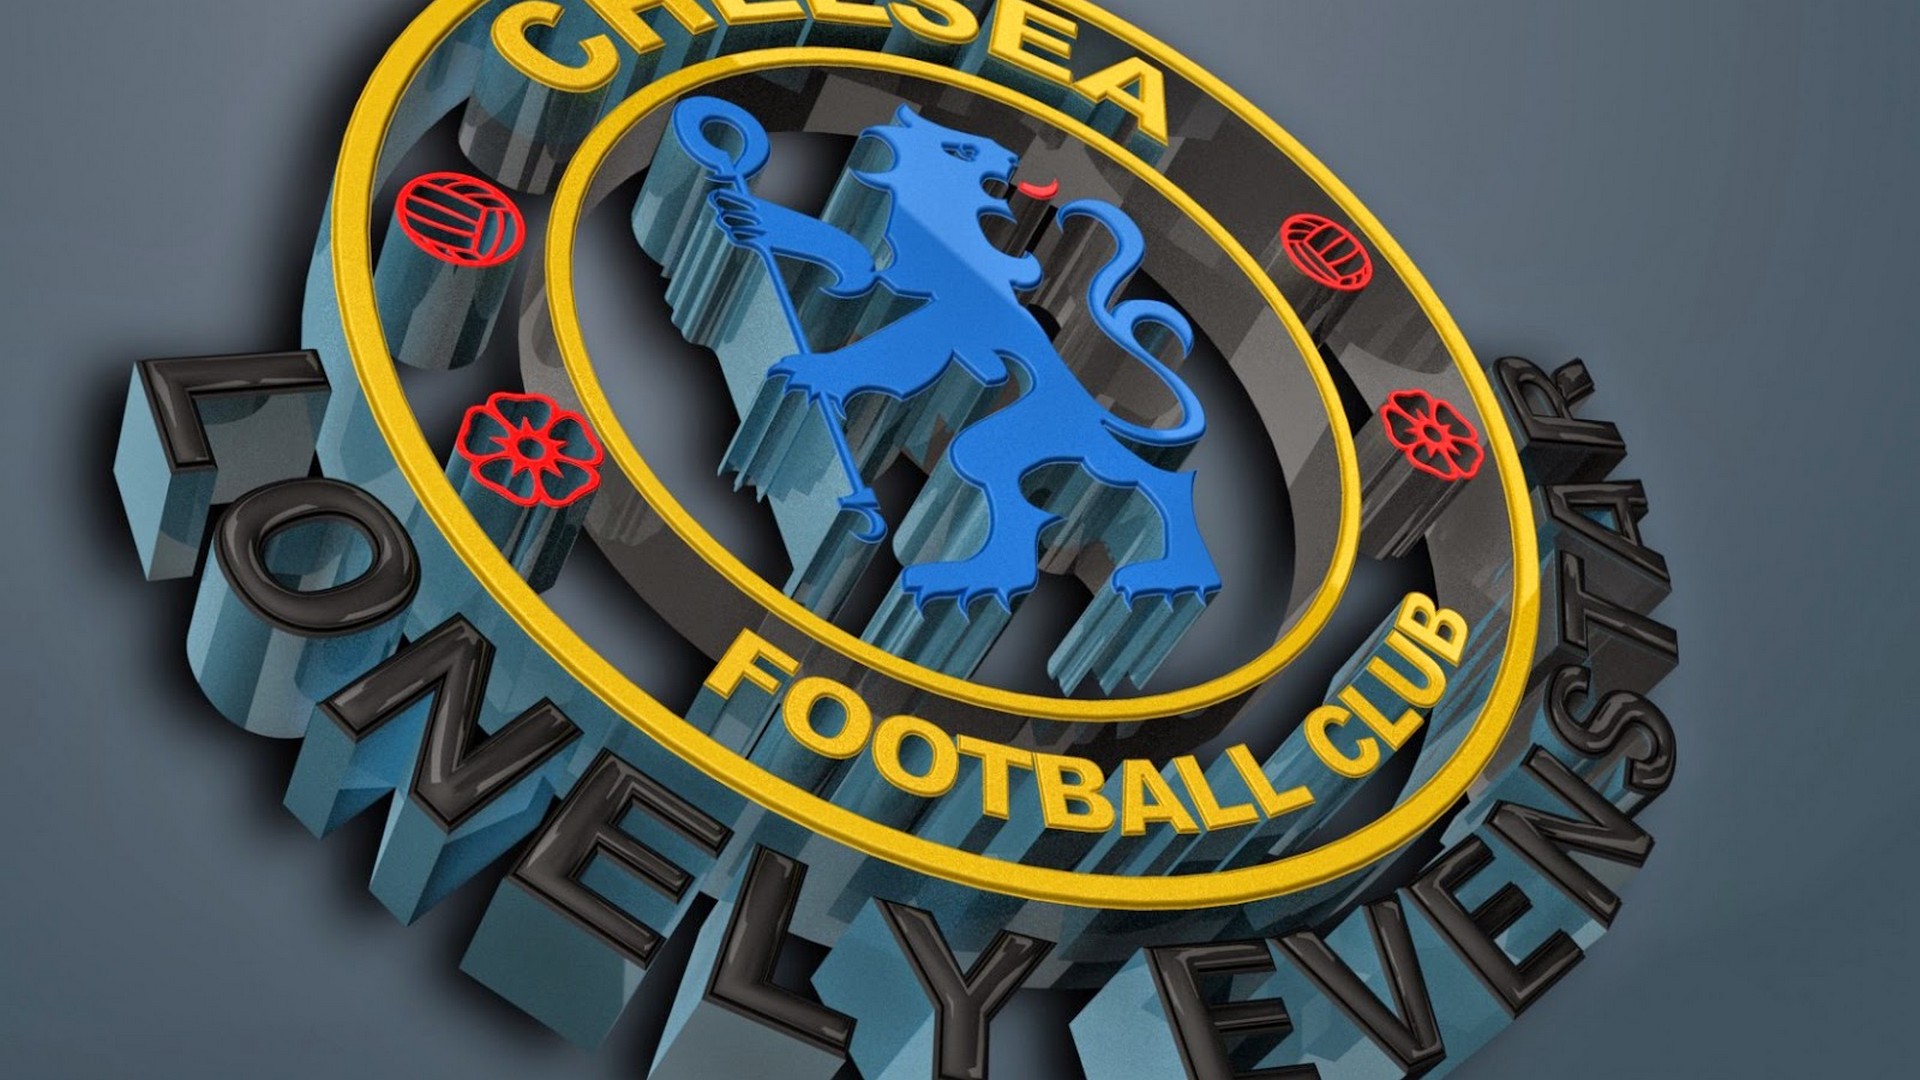 Wallpapers HD Chelsea London With Resolution 1920X1080 pixel. You can make this wallpaper for your Mac or Windows Desktop Background, iPhone, Android or Tablet and another Smartphone device for free